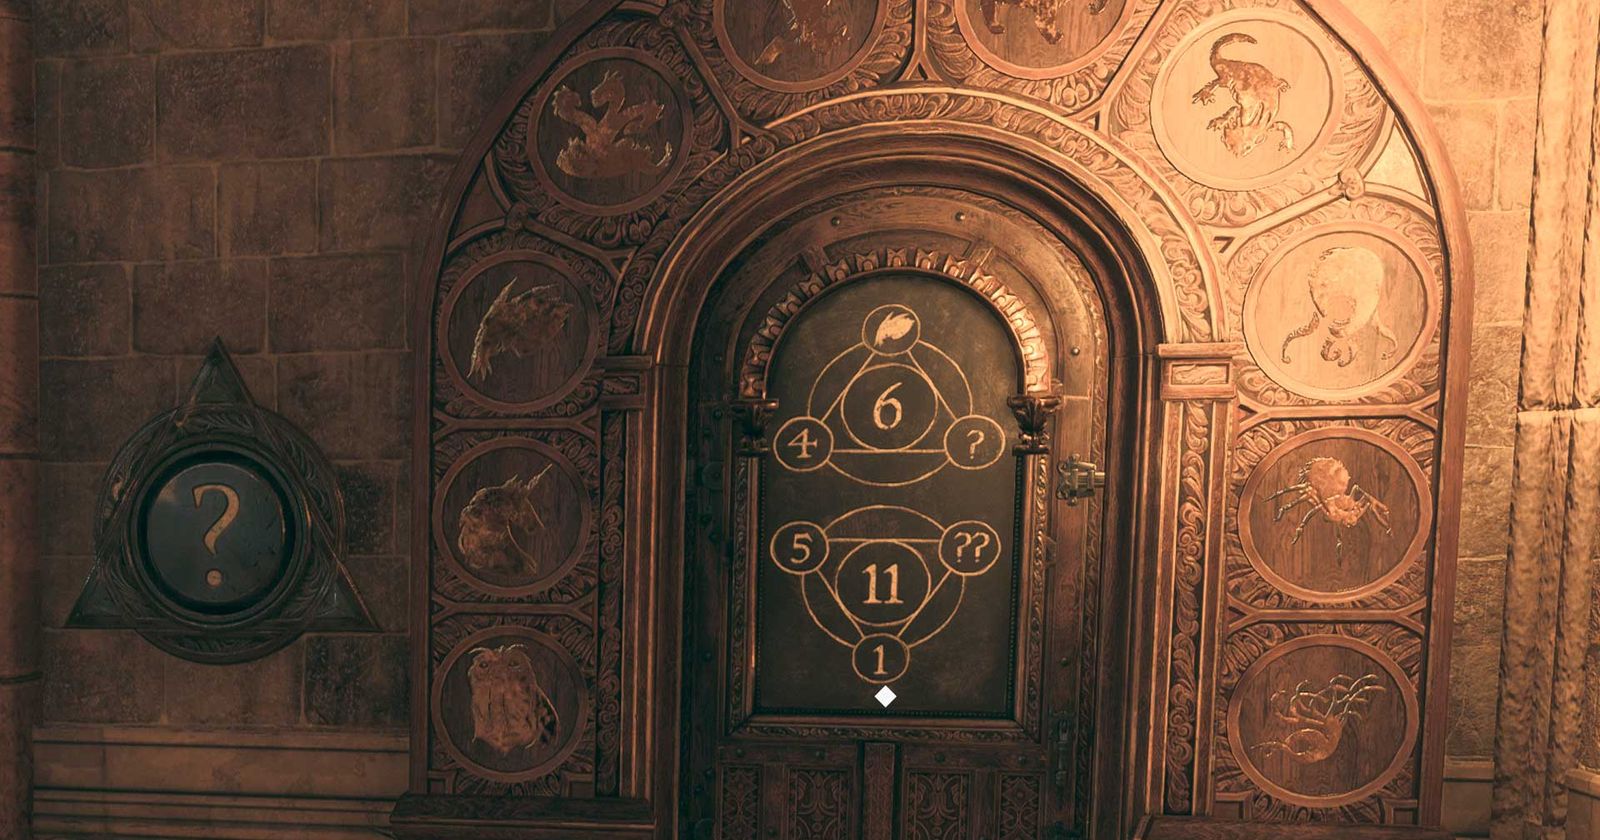 Hogwarts Legacy door puzzle explained: How to solve simple and fast